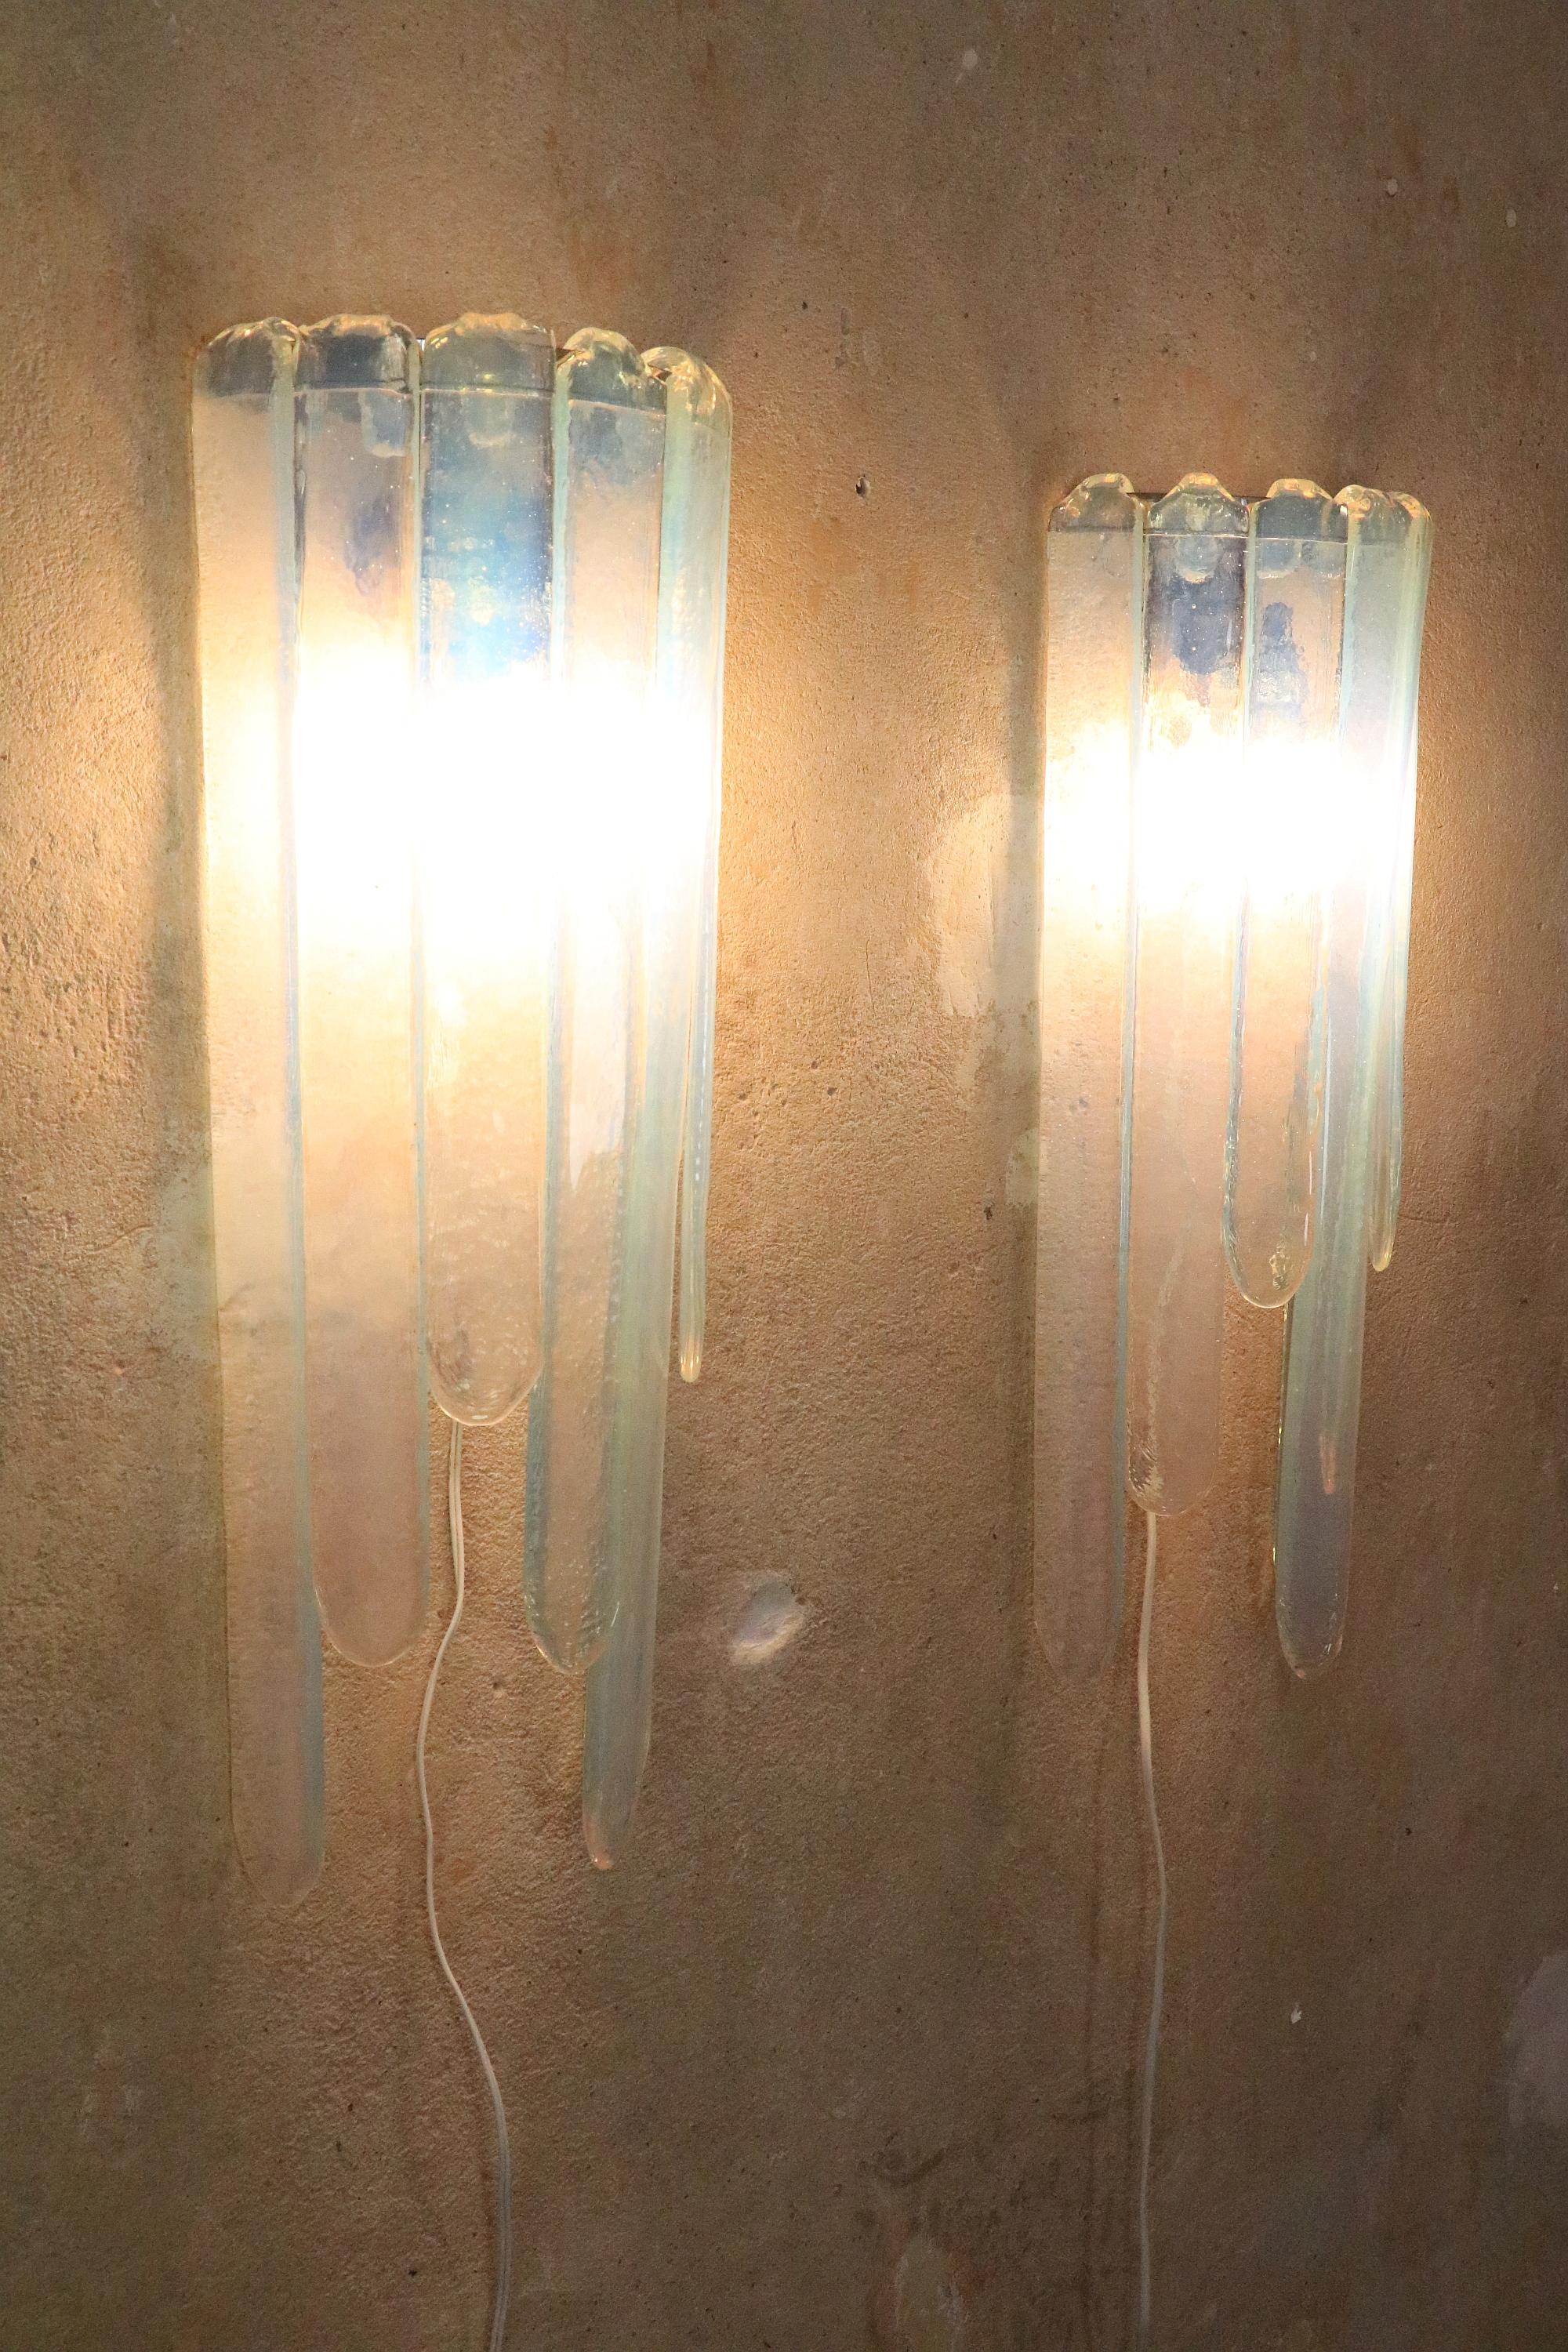 One of three very rare ice blue Murano glass wall lamps.
Design: Carlo Nason for Mazzega
 
Cascading glass rods arranged at different heights, simply hung in a frame. Seven rods per frame.
Exceptional color.
 
Very well preserved. New sockets